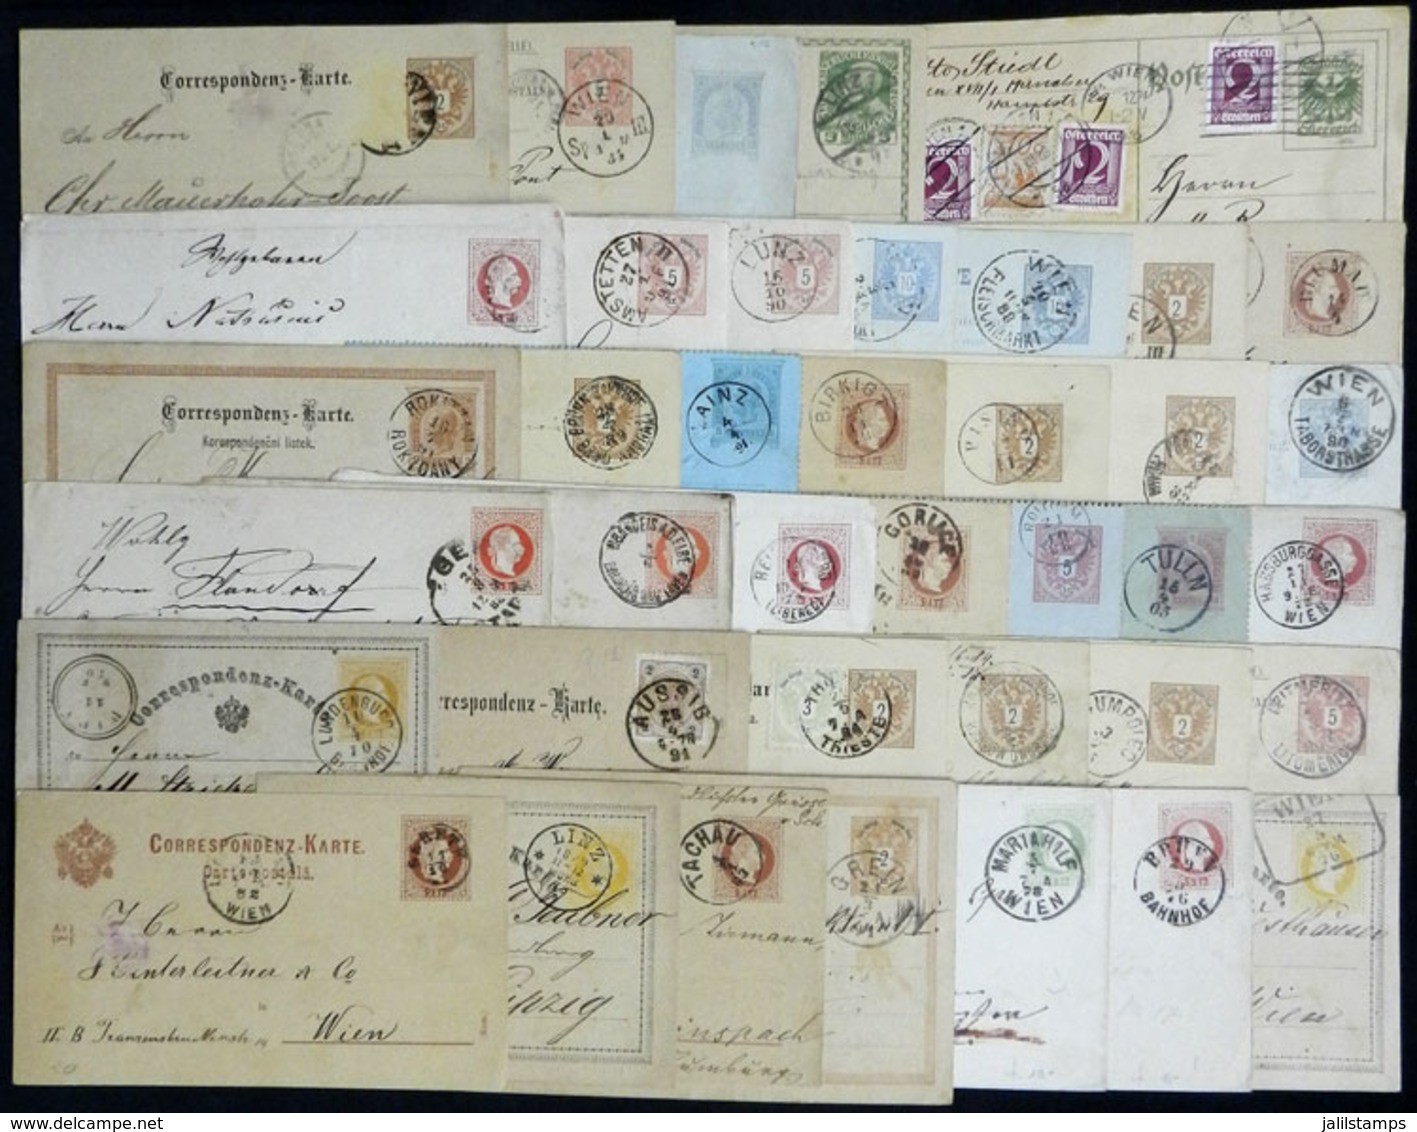 AUSTRIA: 39 Used Postal Stationeries, Most Very Old, There Are Scarce And Interesting Postmarks, Fine To Very Fine Gener - Briefe U. Dokumente